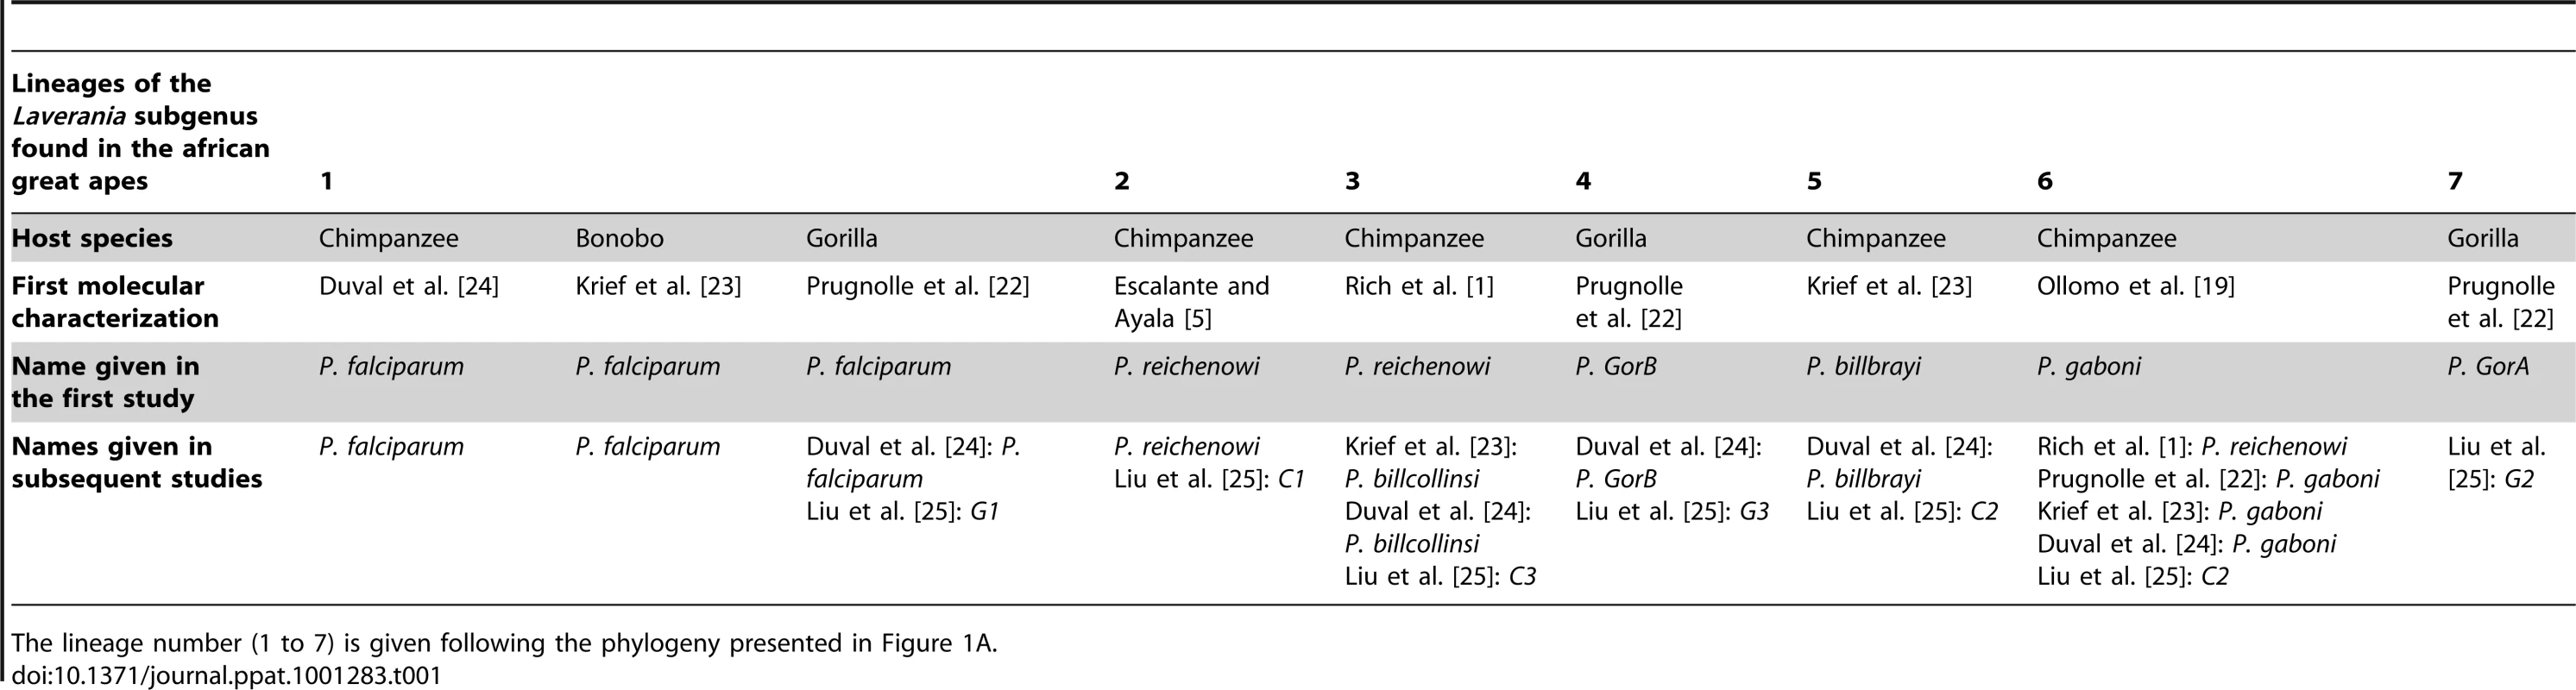 Historic overview of the molecular descriptions and of the names given to the different lineages (seven lineages) of the <i>Laverania</i> subgenus.